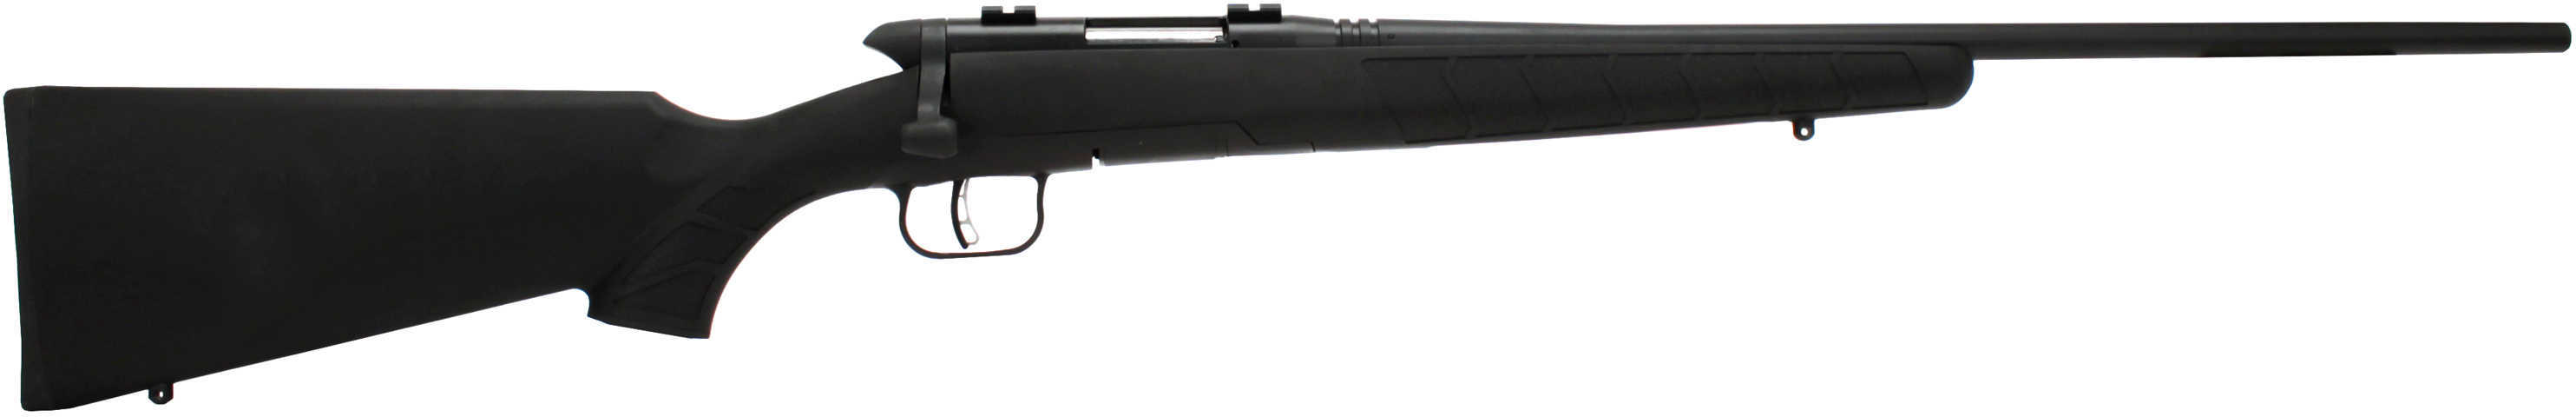 Savage Arms Model BMag 17 Win Super Mag 17 wsm 22" Barrel 8 Round Rotary Magazine Bolt Action Rifle 96901